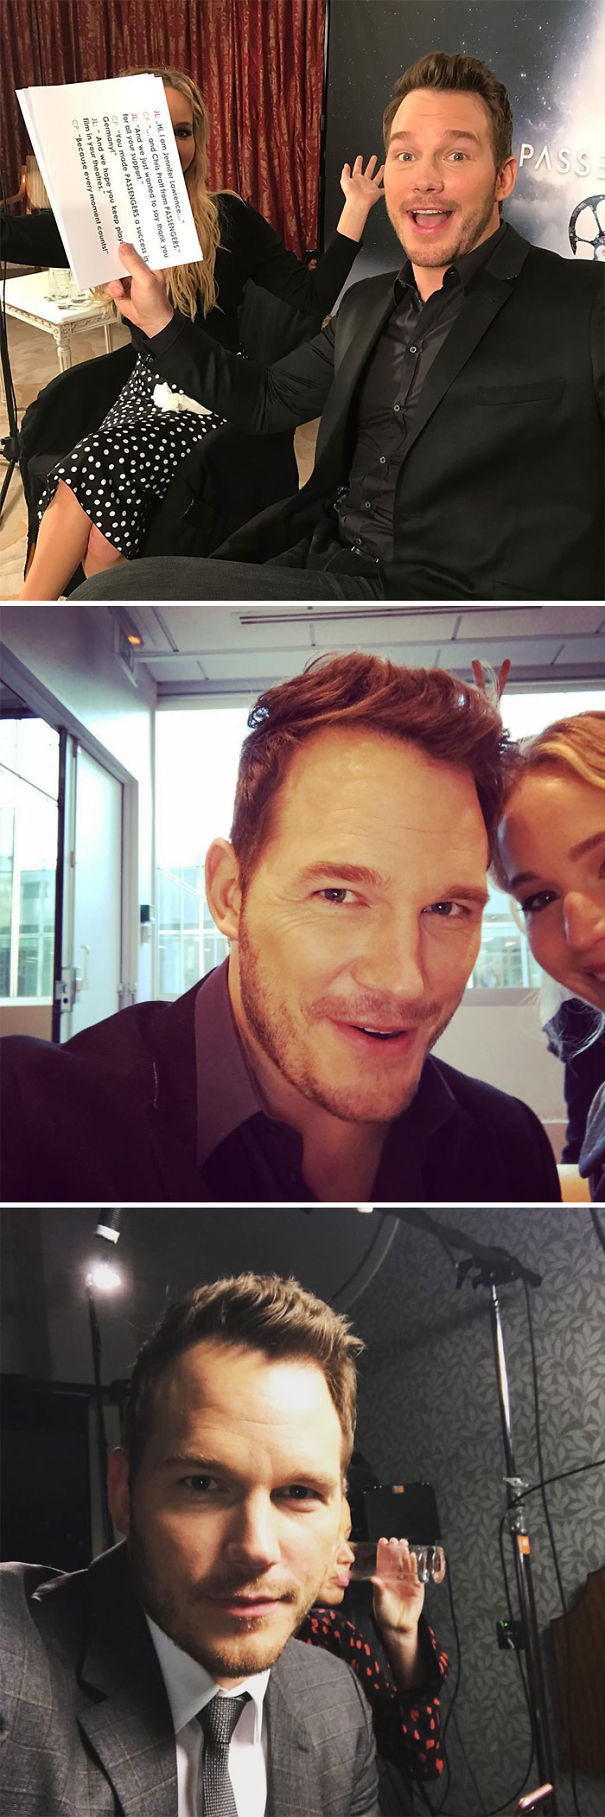 Chris Pratt Posted These Pics To His Instagram After Fans Asked Him To Hang Out With Jennifer Lawrence